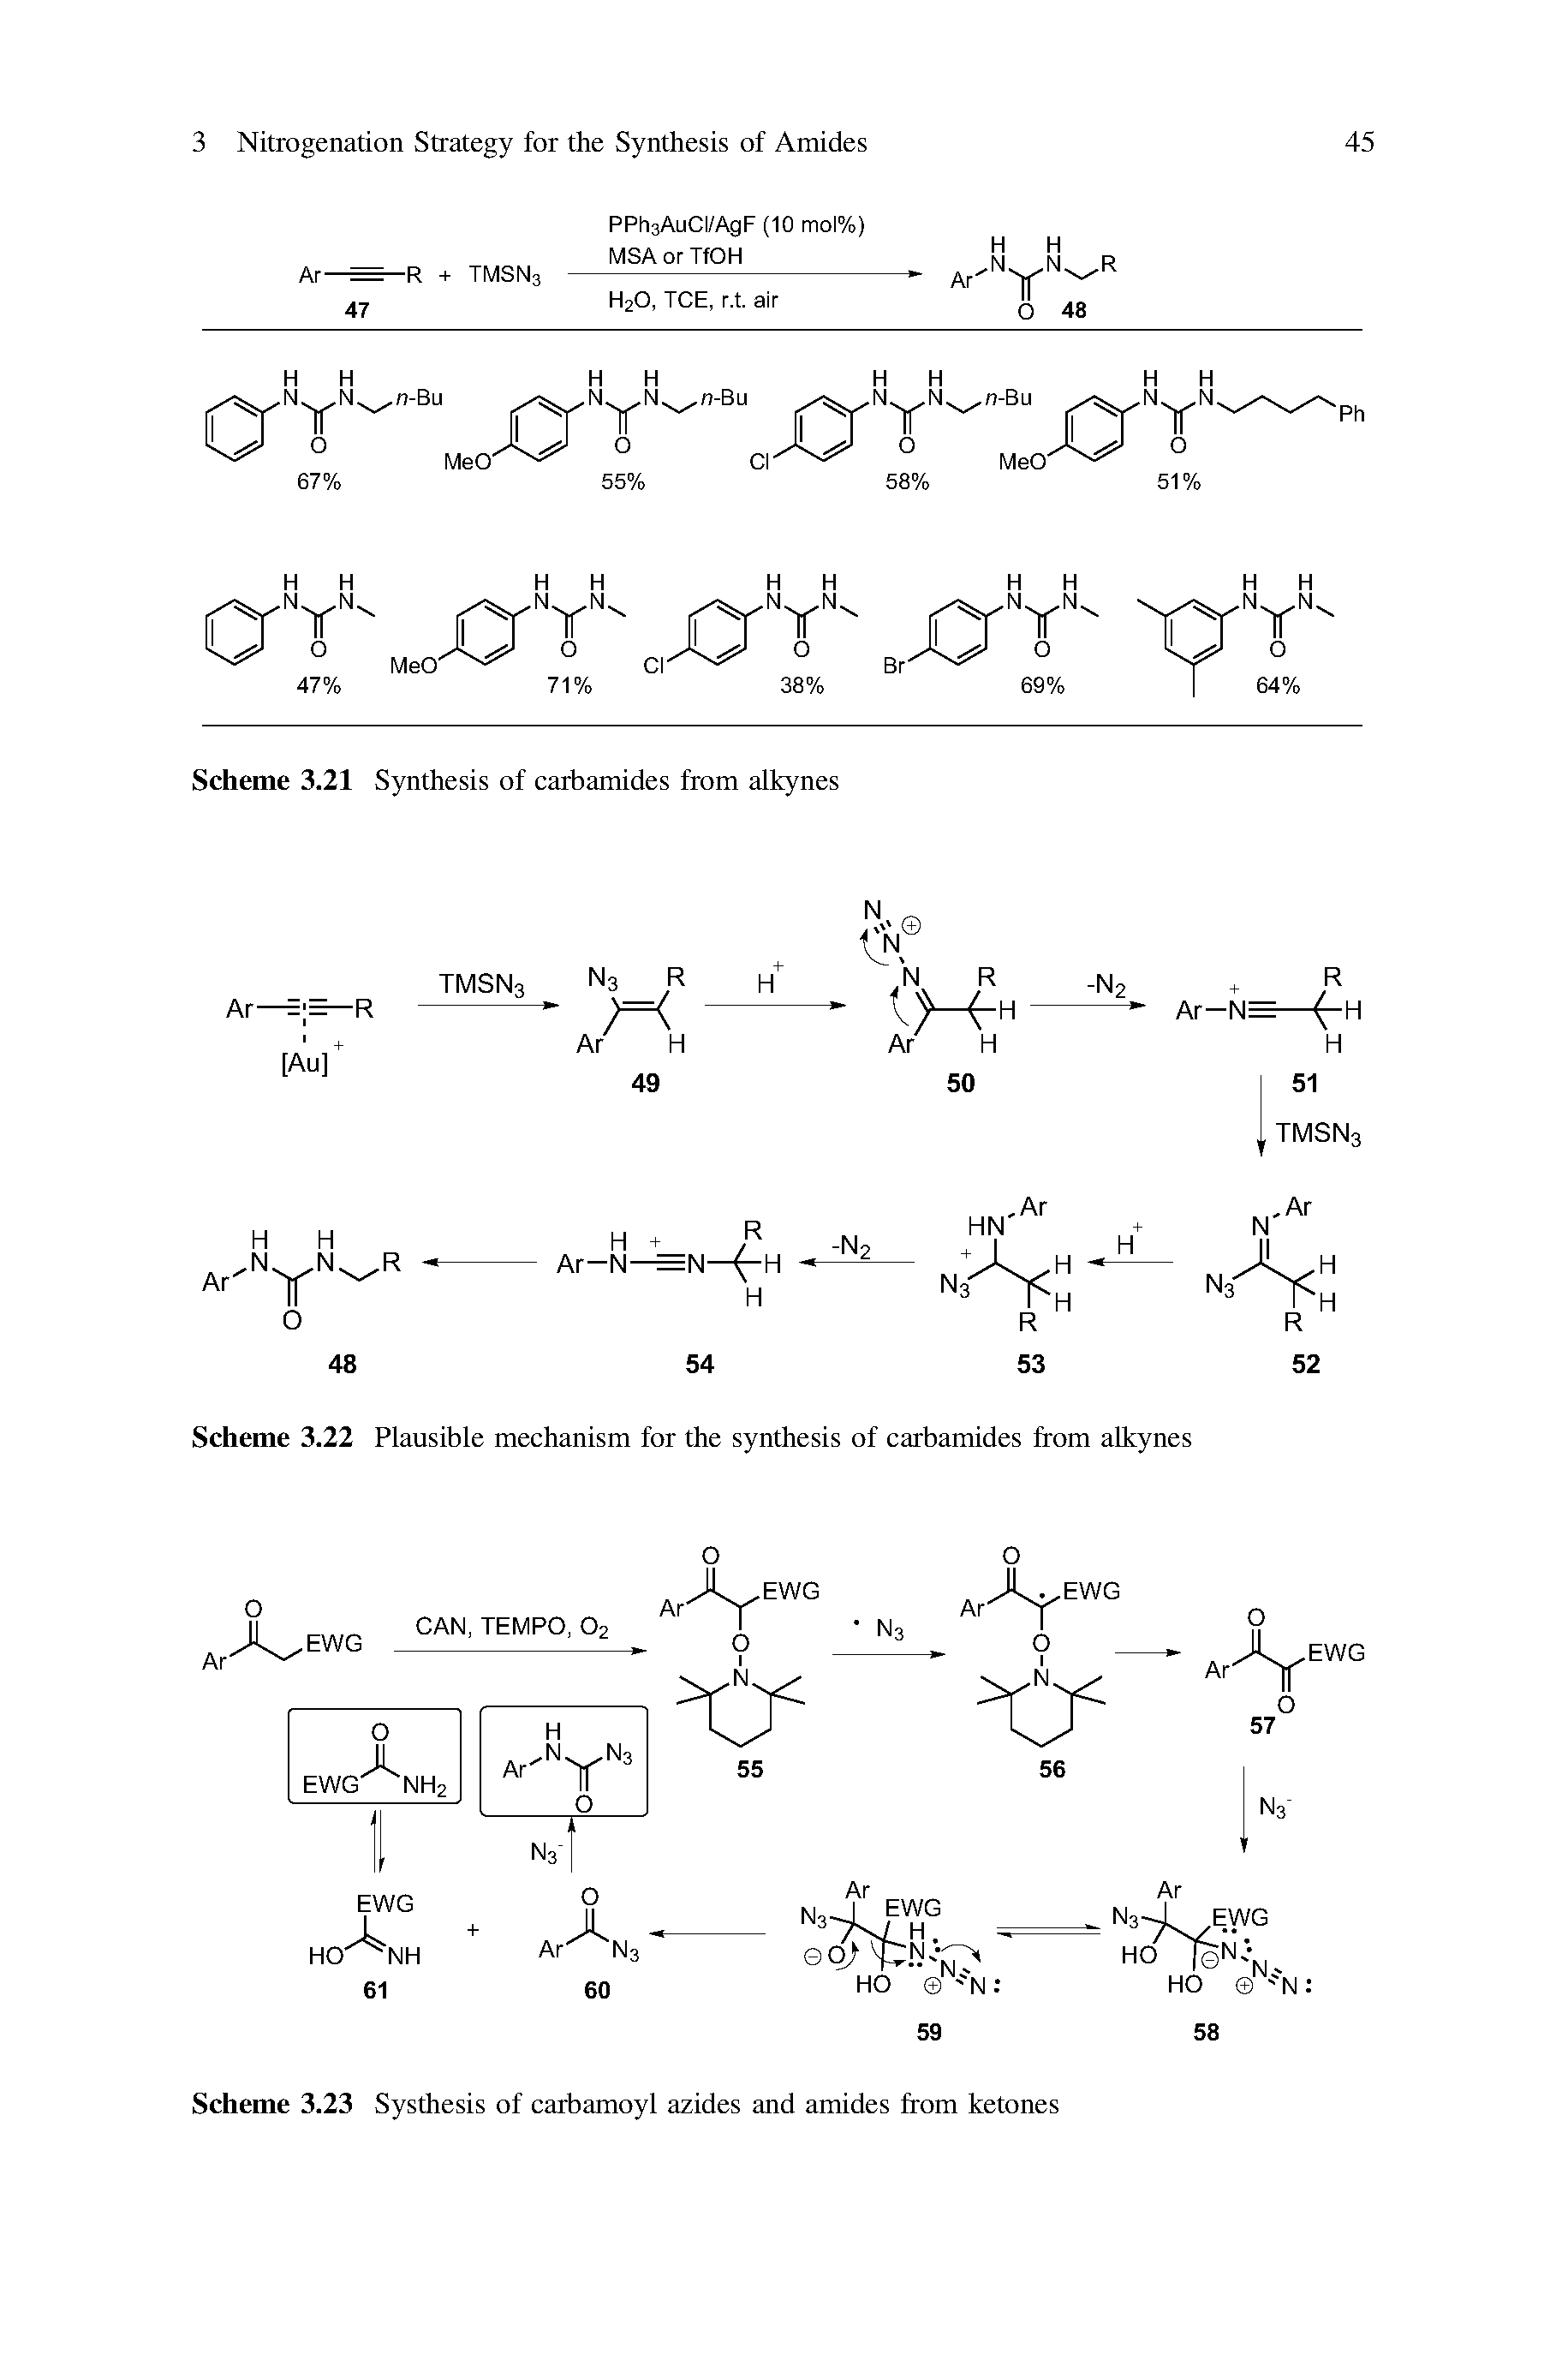 Scheme 3.23 Systhesis of carbamoyl azides and amides from ketones...